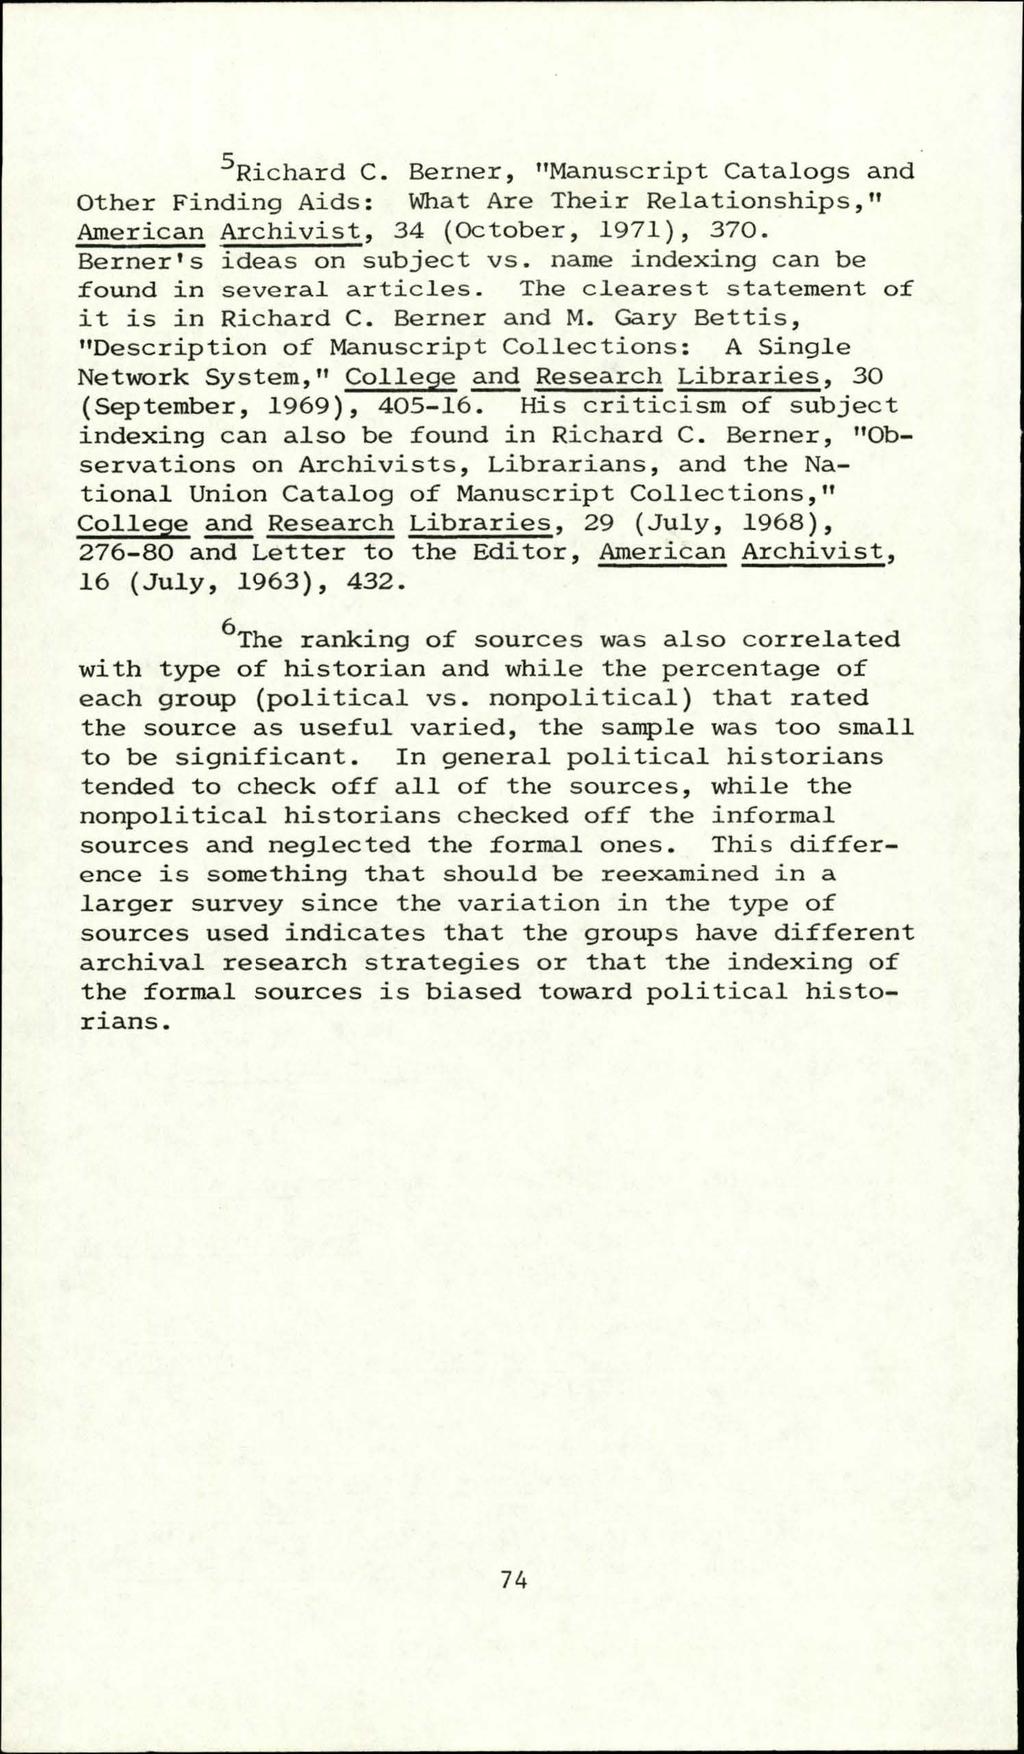 Stevens: The Historian and Archival Finding Aids 5 Richard C. Berner, "Manuscript Catalogs and. Other Finding Aids: What Are Their Relationships," American Archivist, 34 (October, 1971), 370.